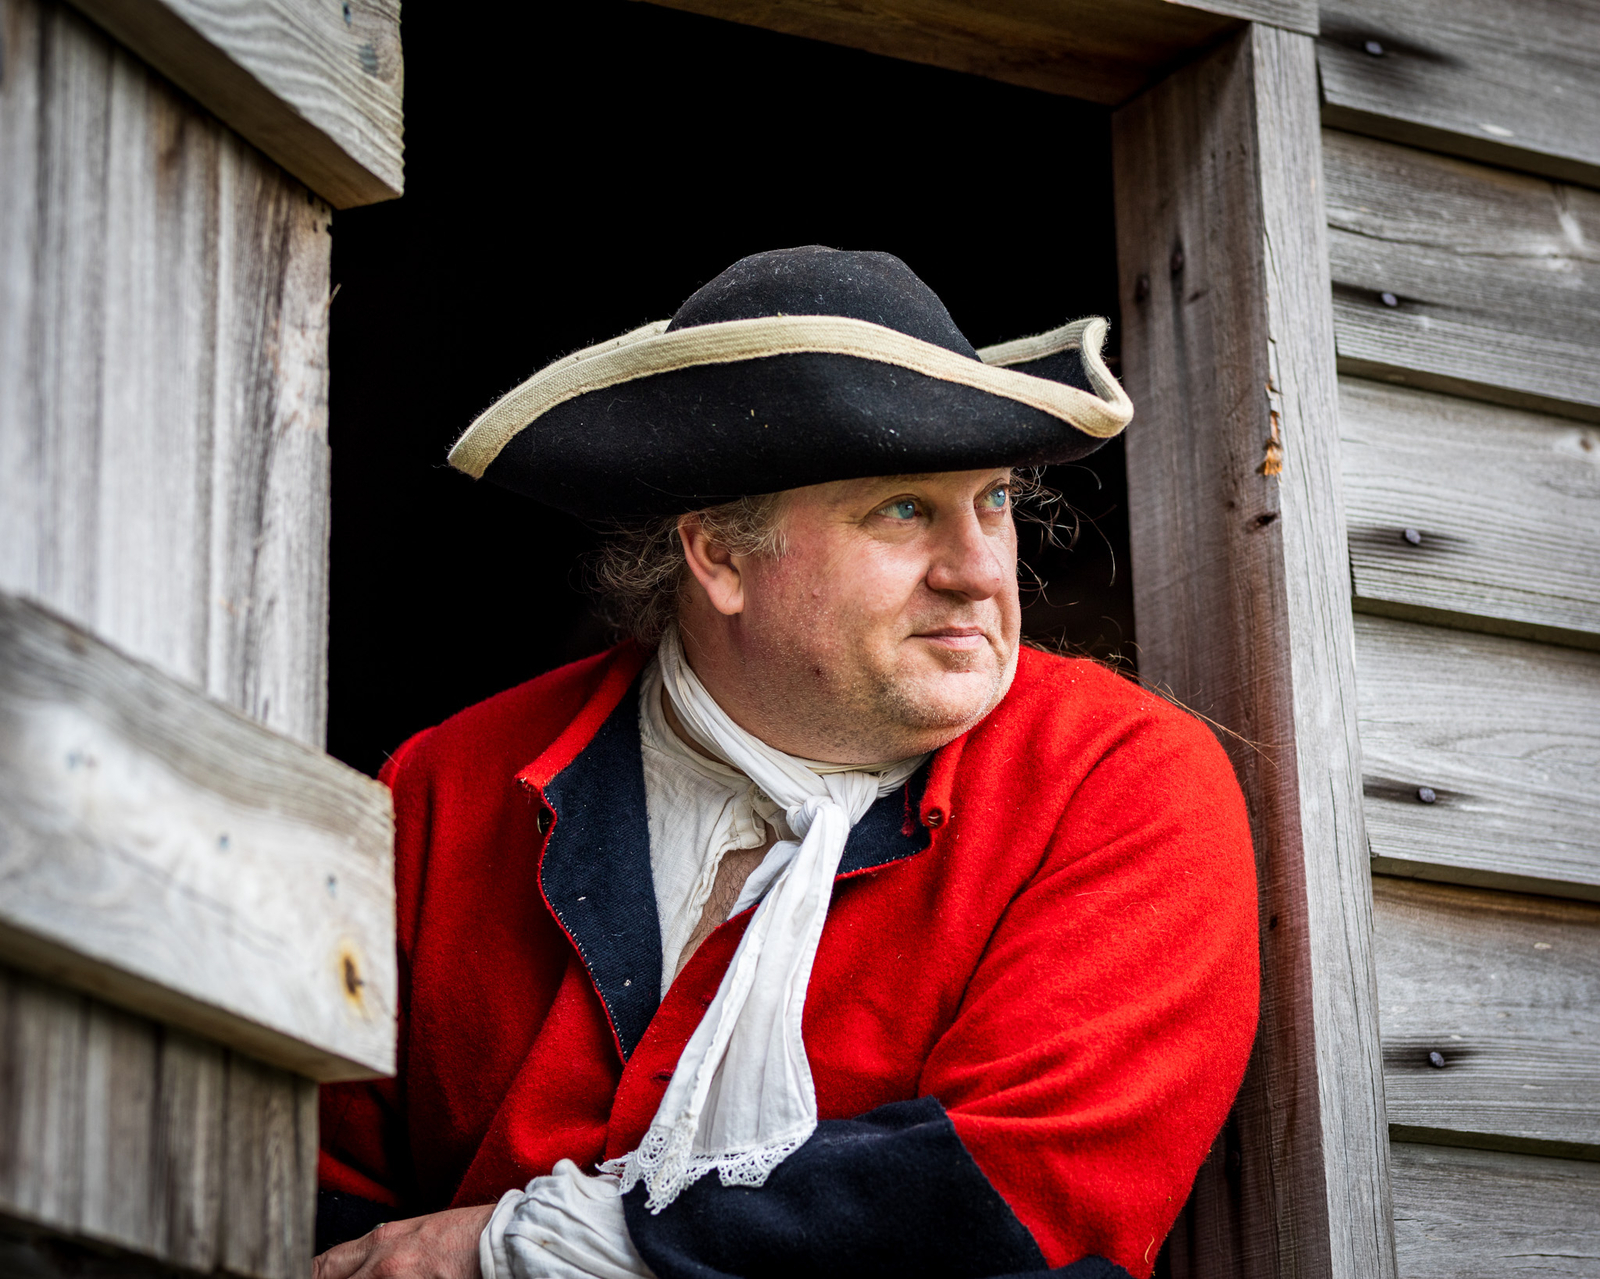 1721: Life of a Sailor, Fort King George, GA